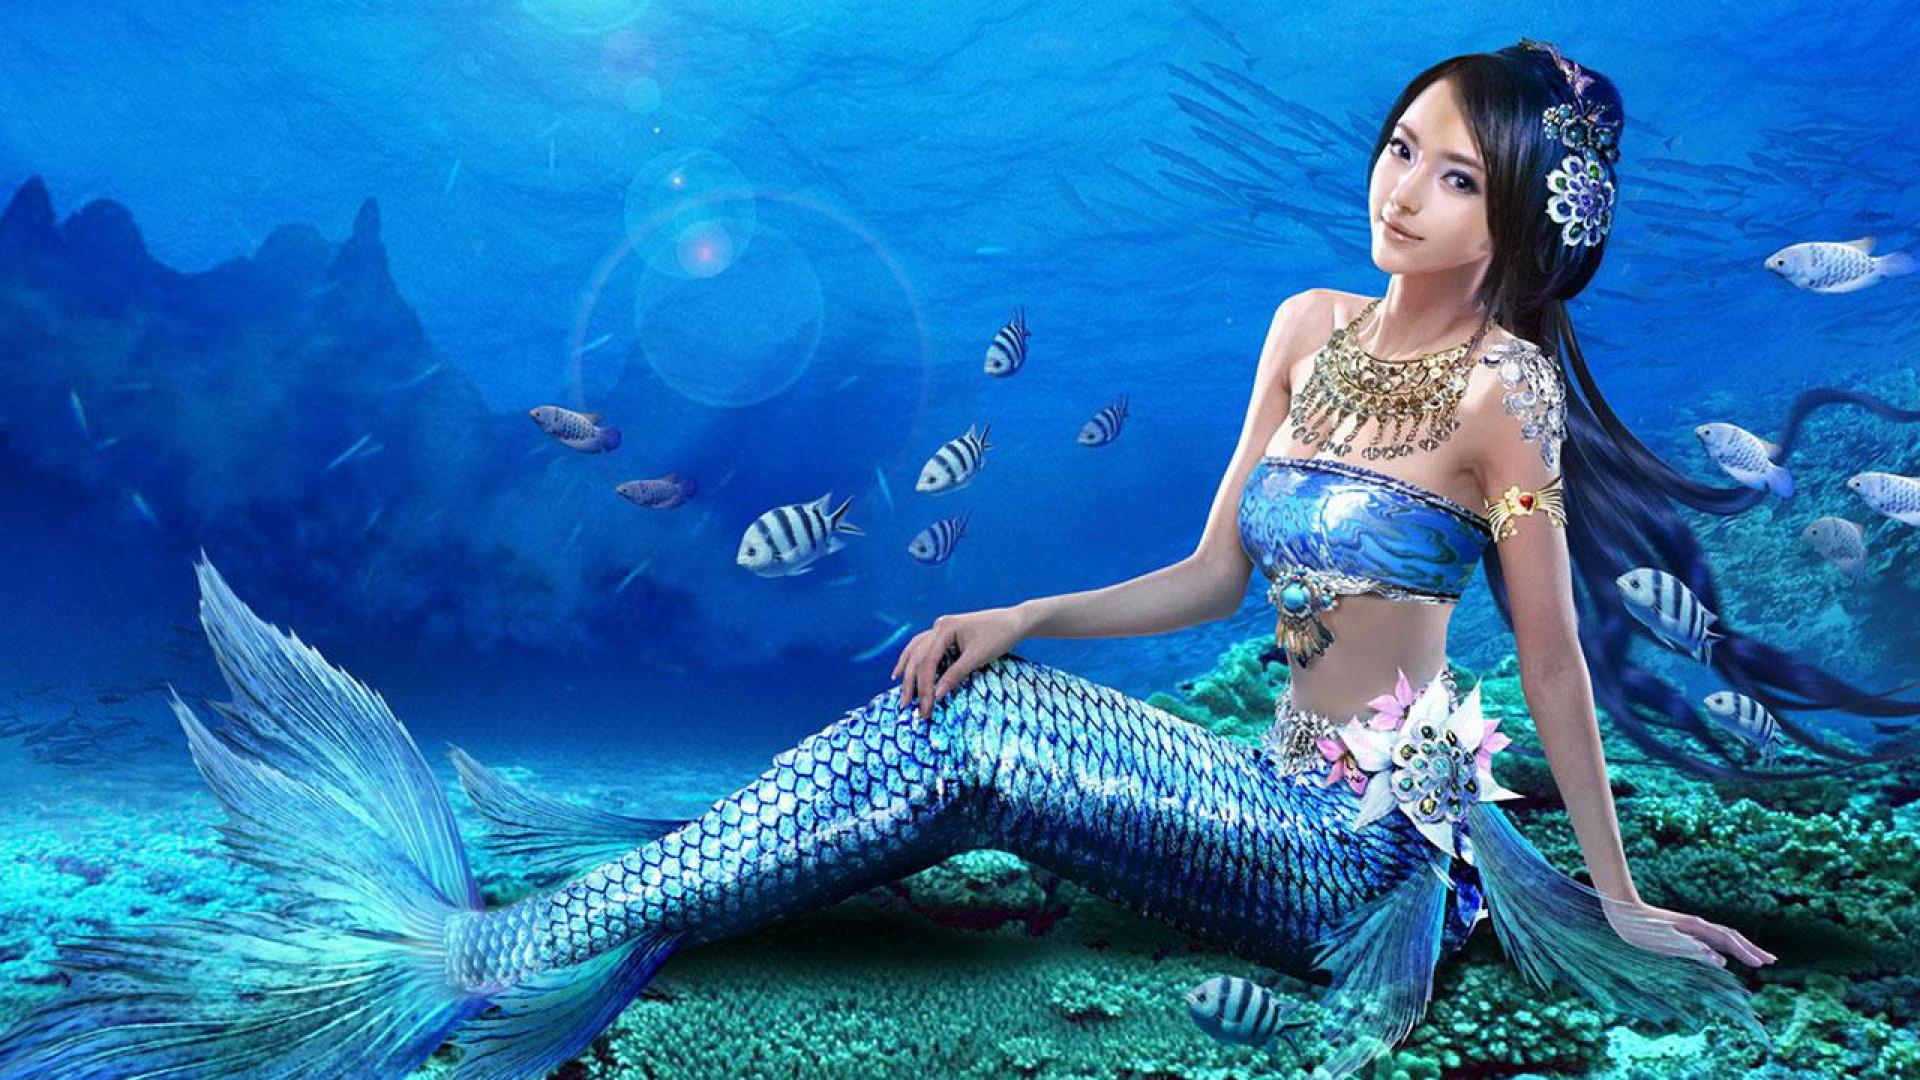 Get the Best Mermaid Wallpaper by Using Mobile Software